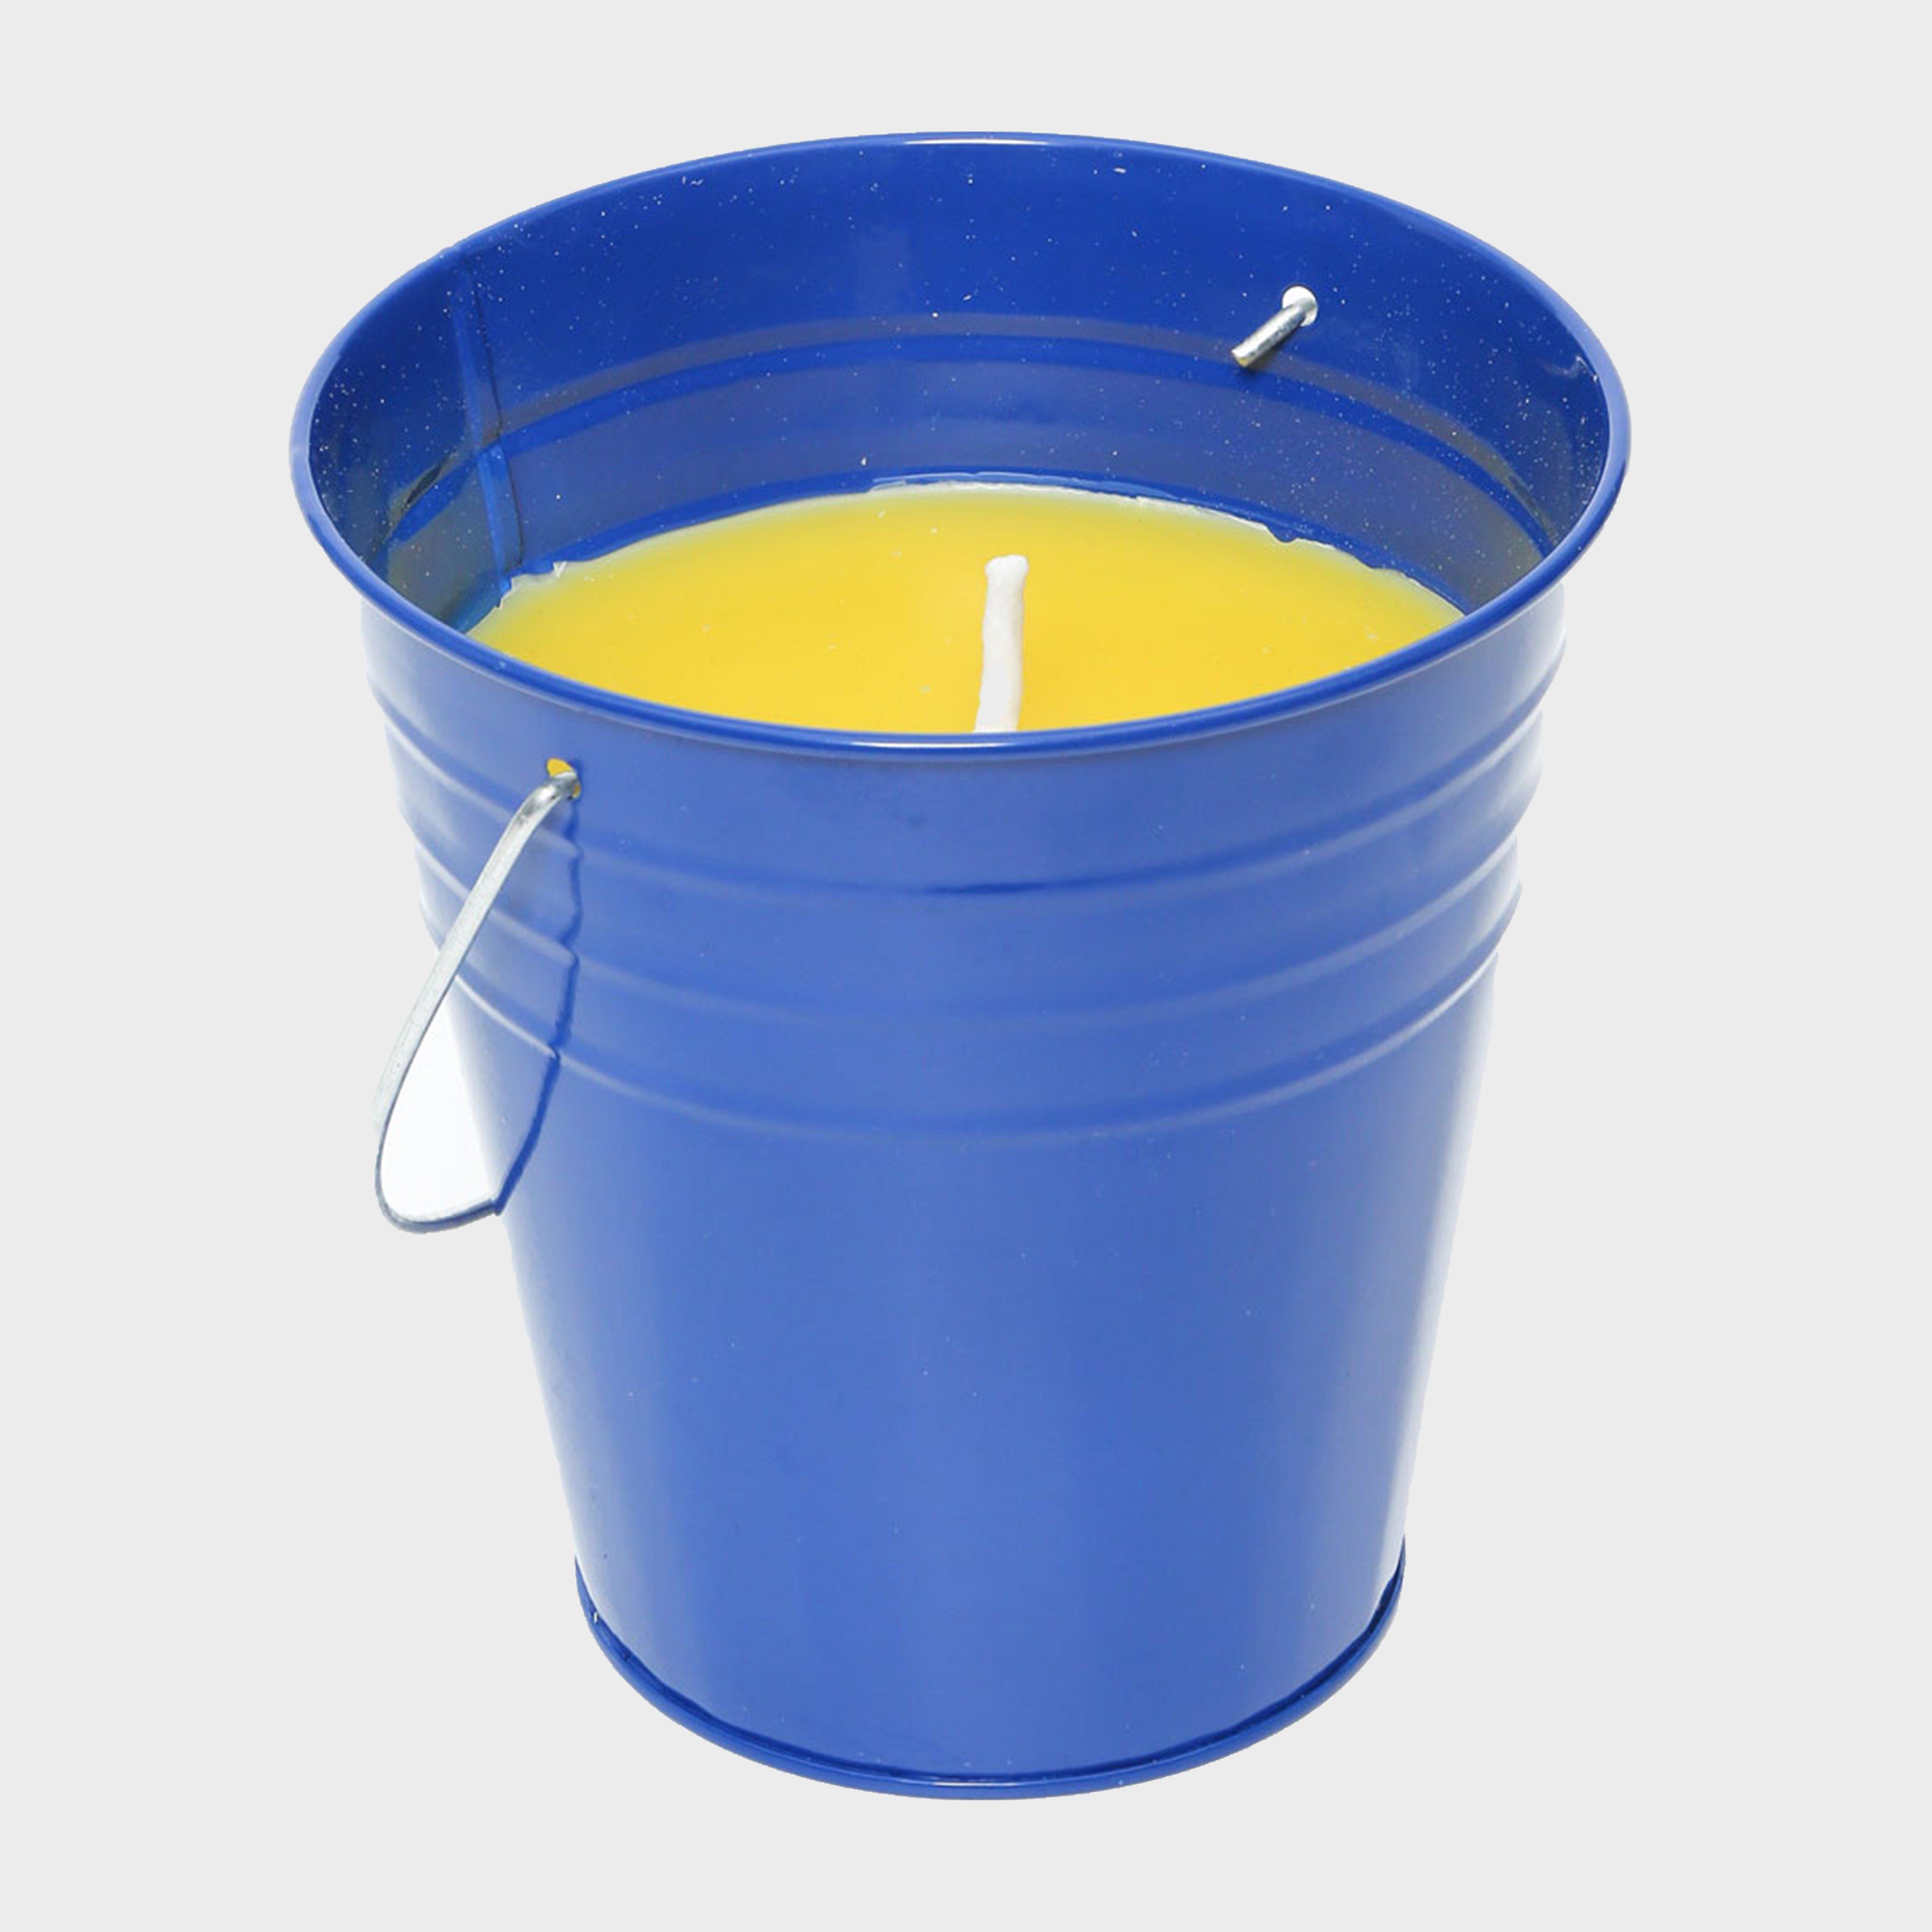 Image of Hi-Gear Citronella Bucket - Blue/Candle, Blue/CANDLE